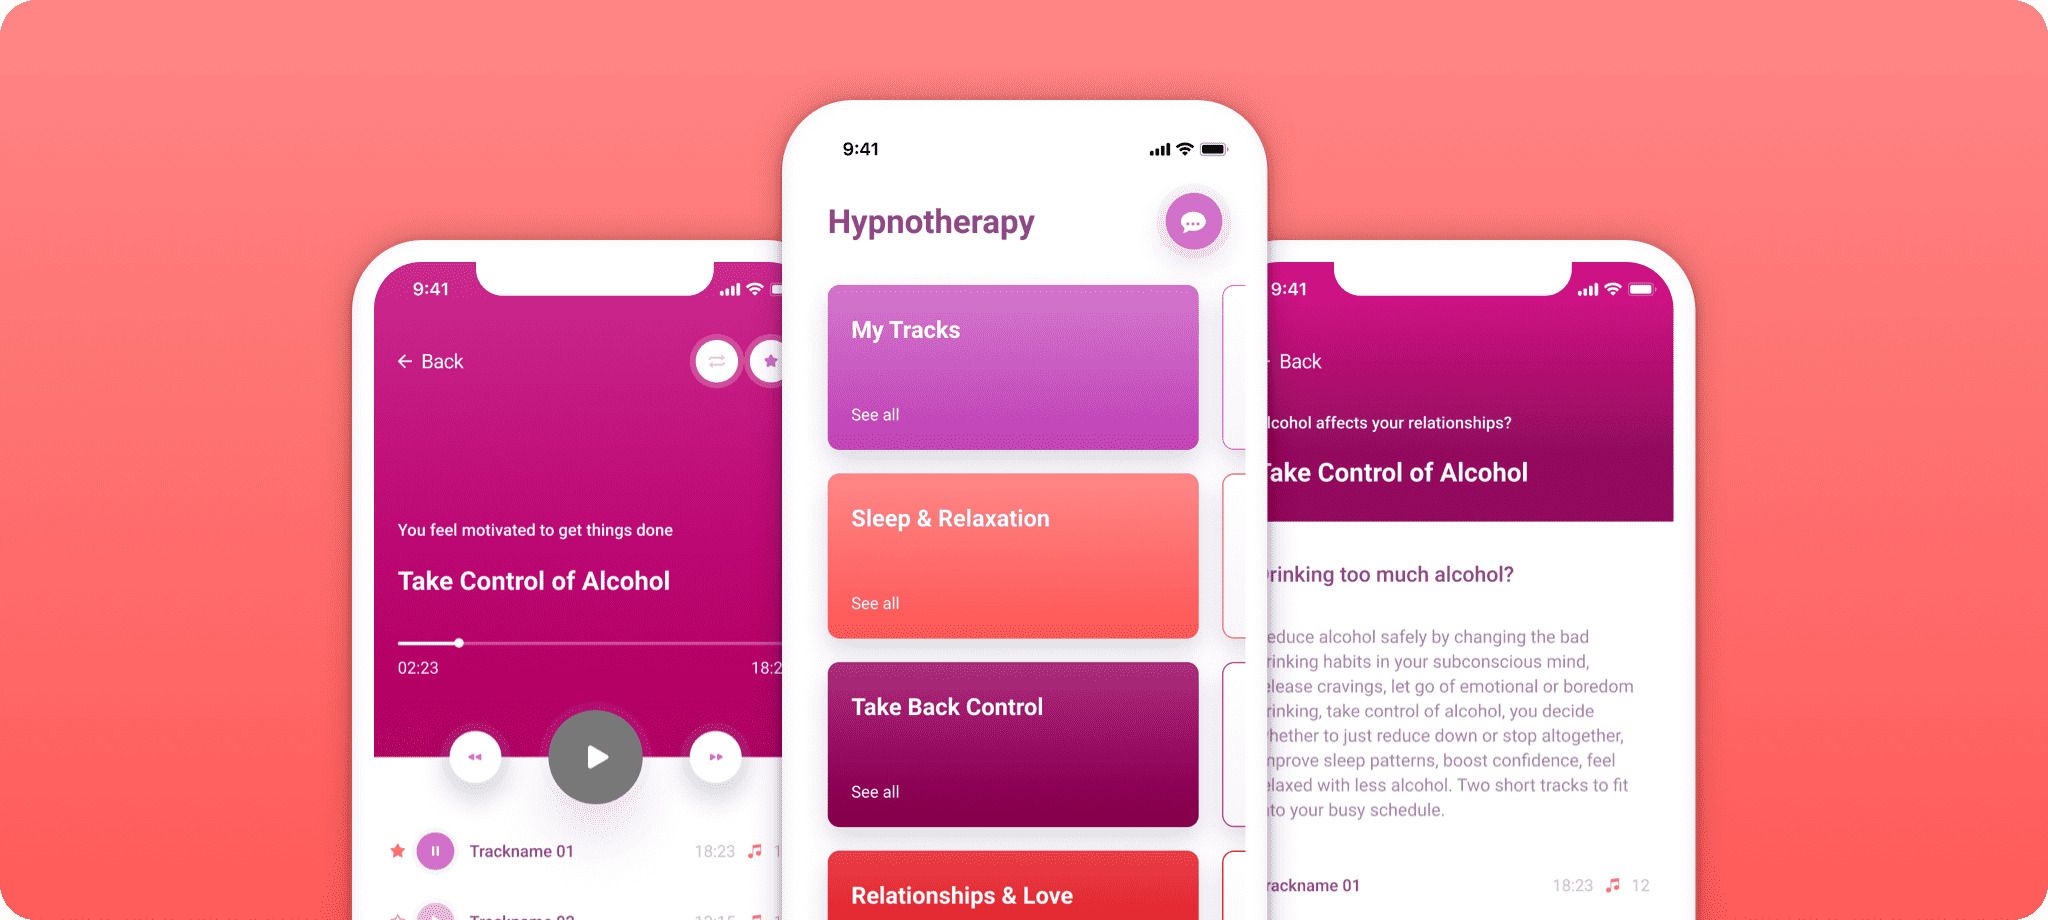 Feel amazing-like mental health apps offer a wide range of therapy session options that meet the needs of most users (*image by [Stormotion](https://stormotion.io/product/be-amazing/){ target="_blank" .default-md}*)